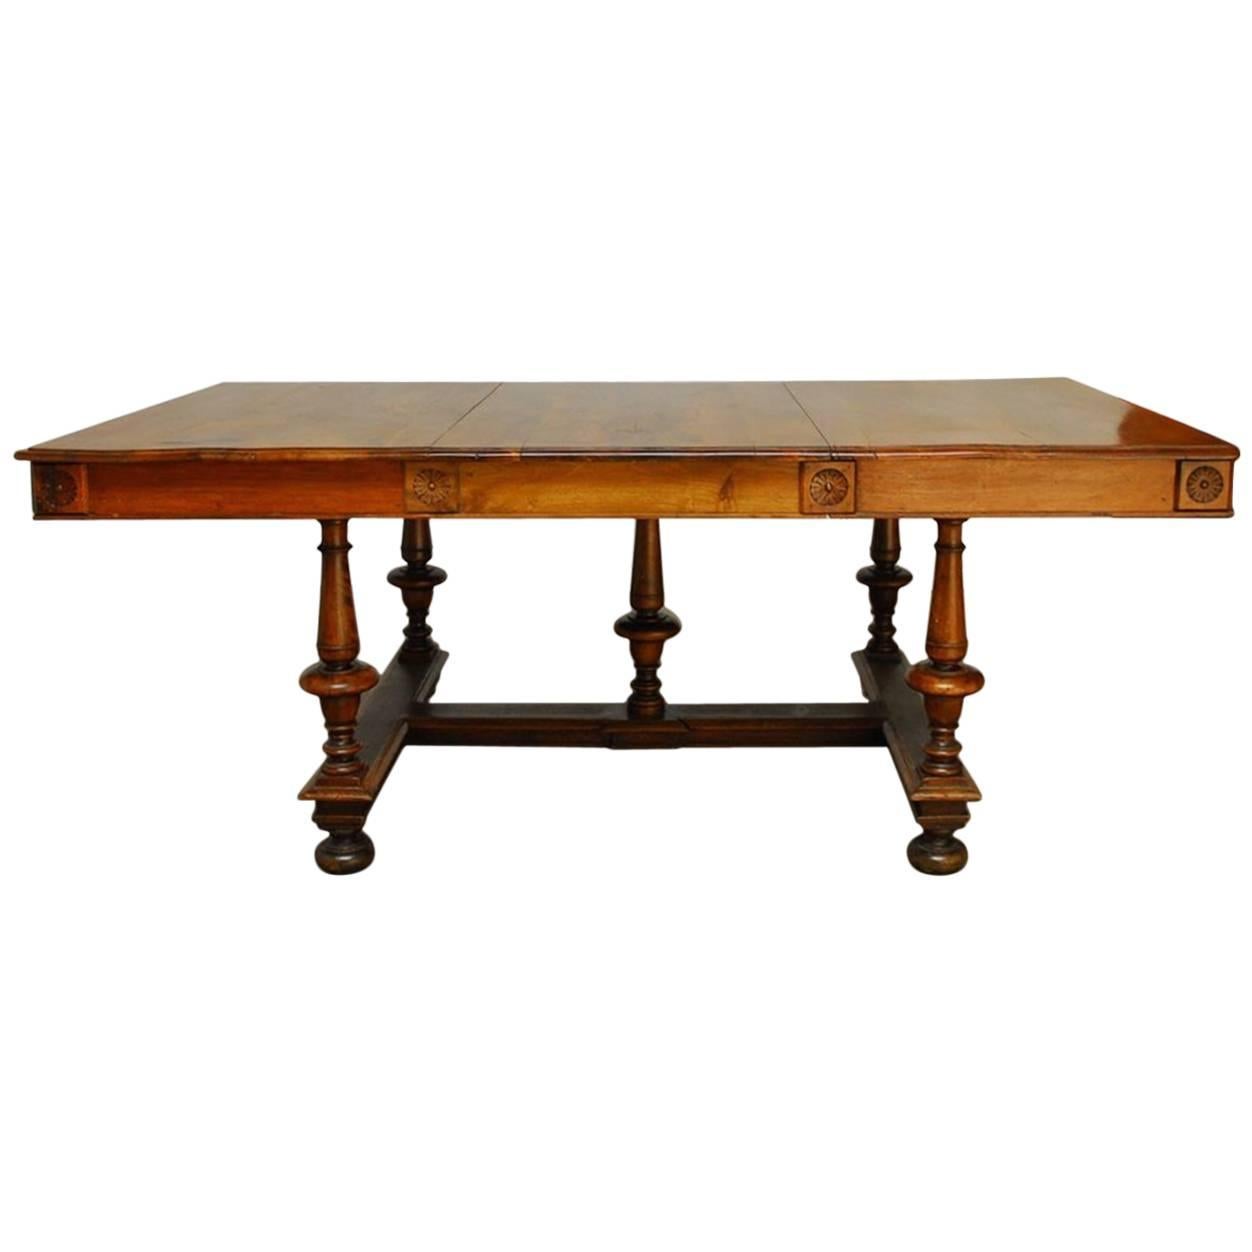 17th Century Louis XIII Period Oak Refectory Dining Table